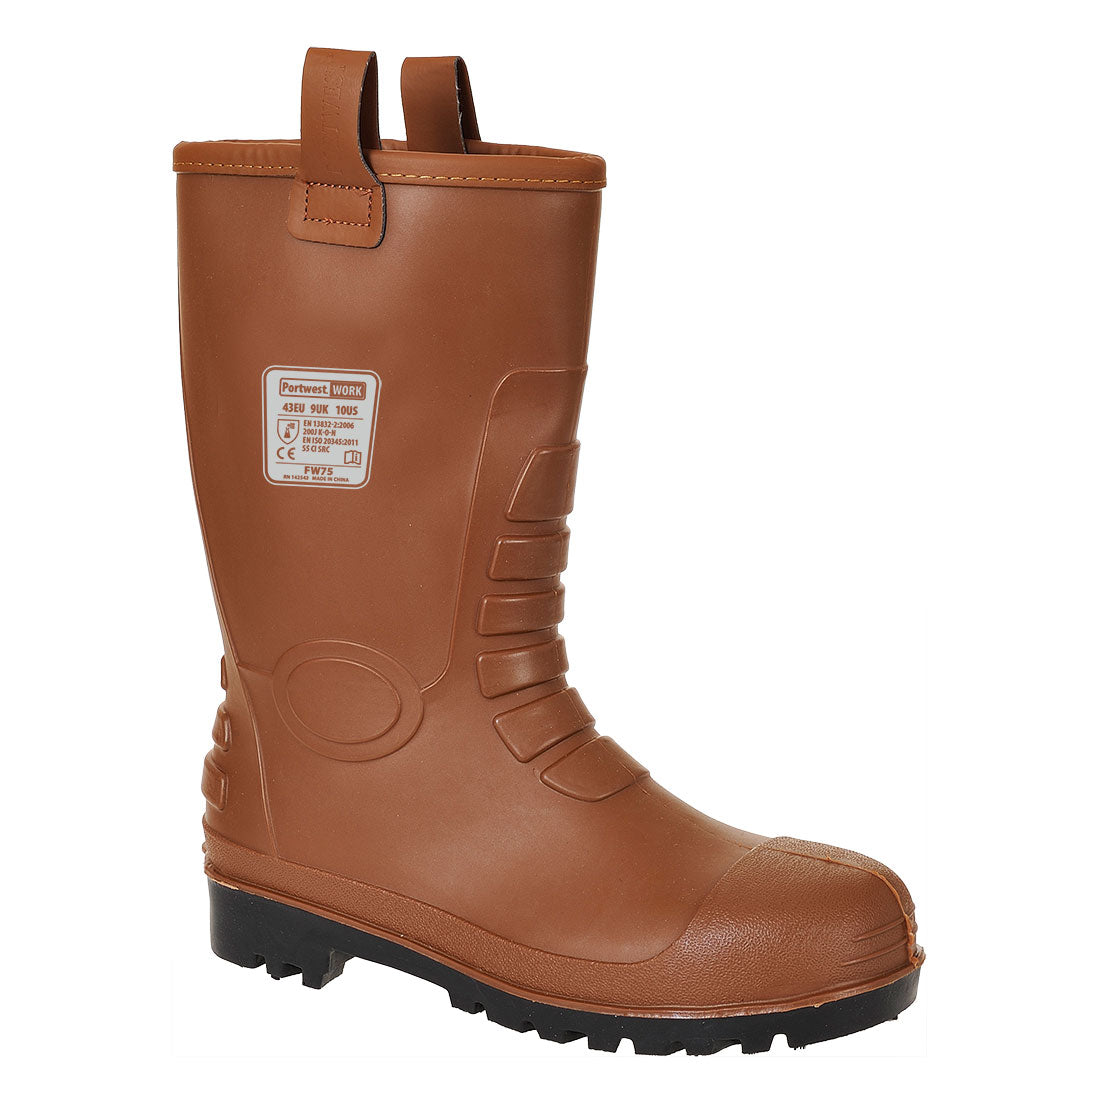 Portwest FW75 Neptune Fur Lined Waterproof Rigger Low Wellington Boot S5 CI - Premium RIGGER BOOTS from Portwest - Just £20.71! Shop now at workboots-online.co.uk